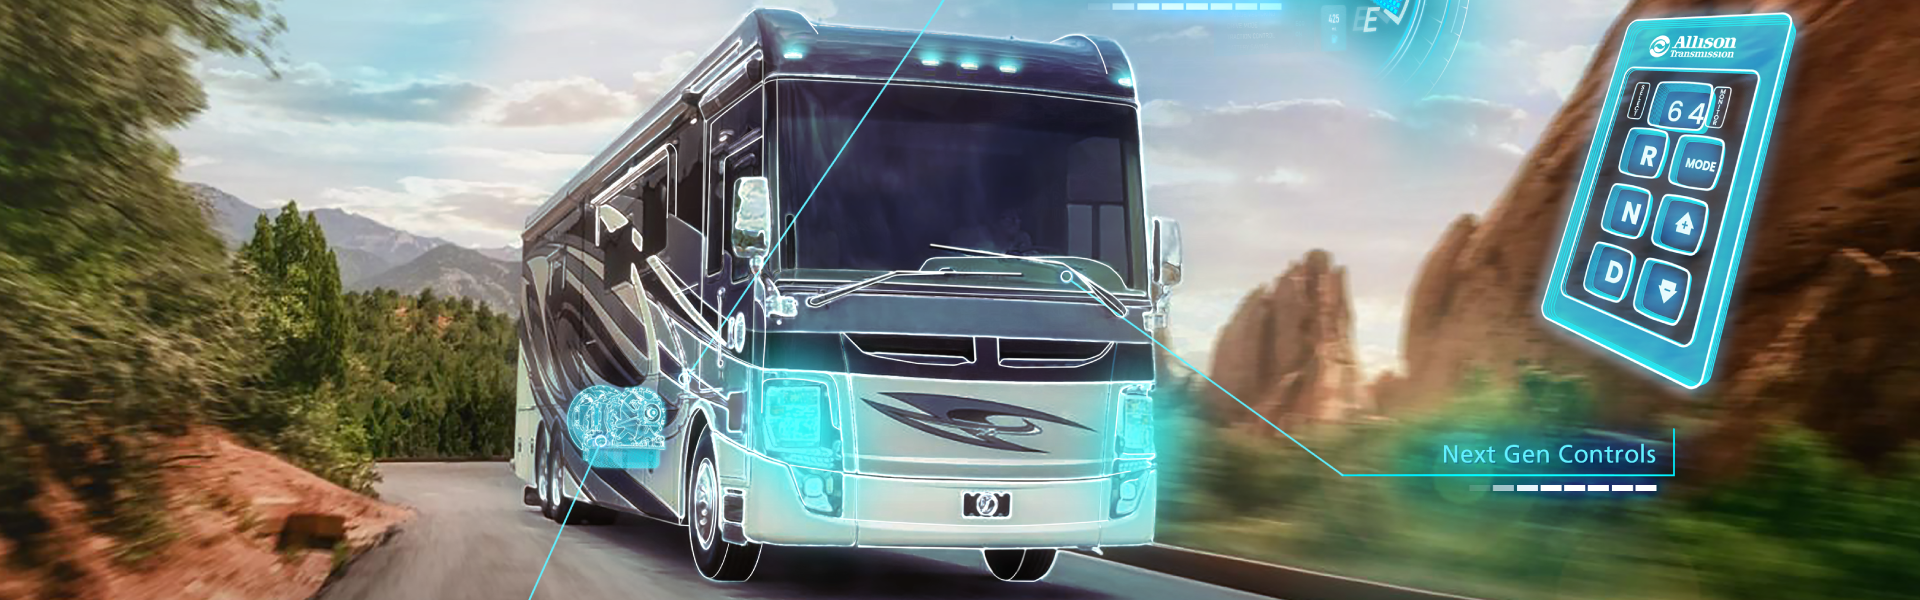 Motorhome_Slider_Reliable_ZH